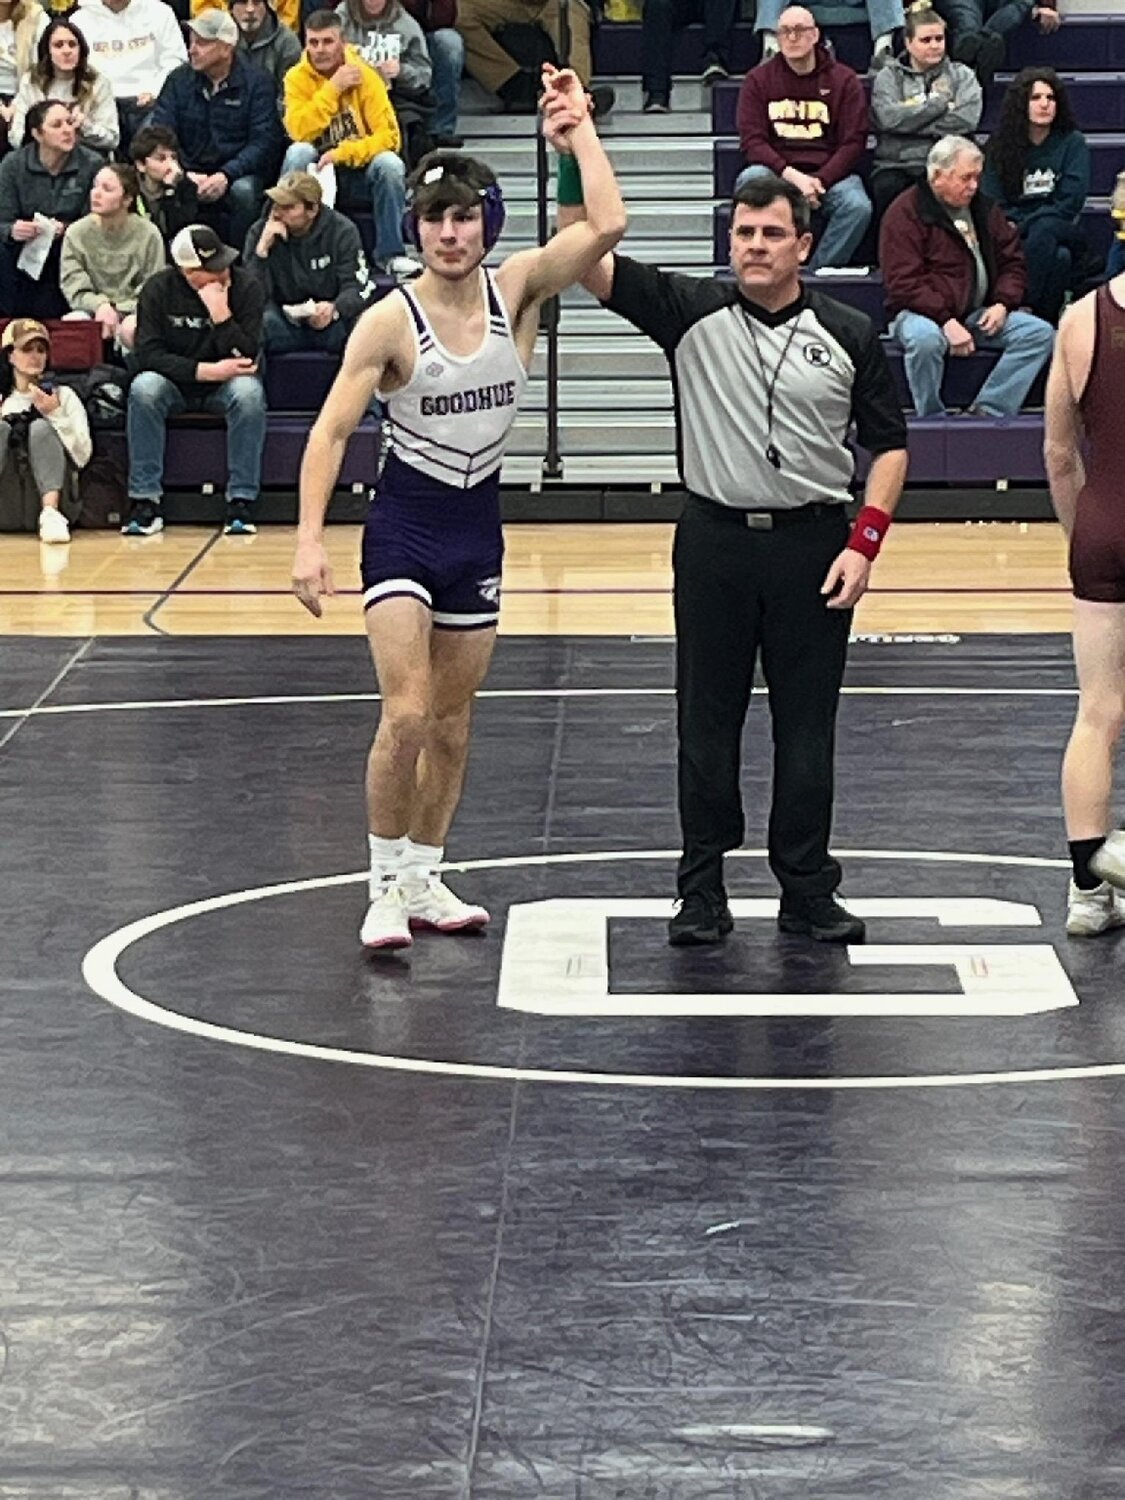 Hayden Holm had 2 wins over Dover Eyota and Kasson - Mantorville